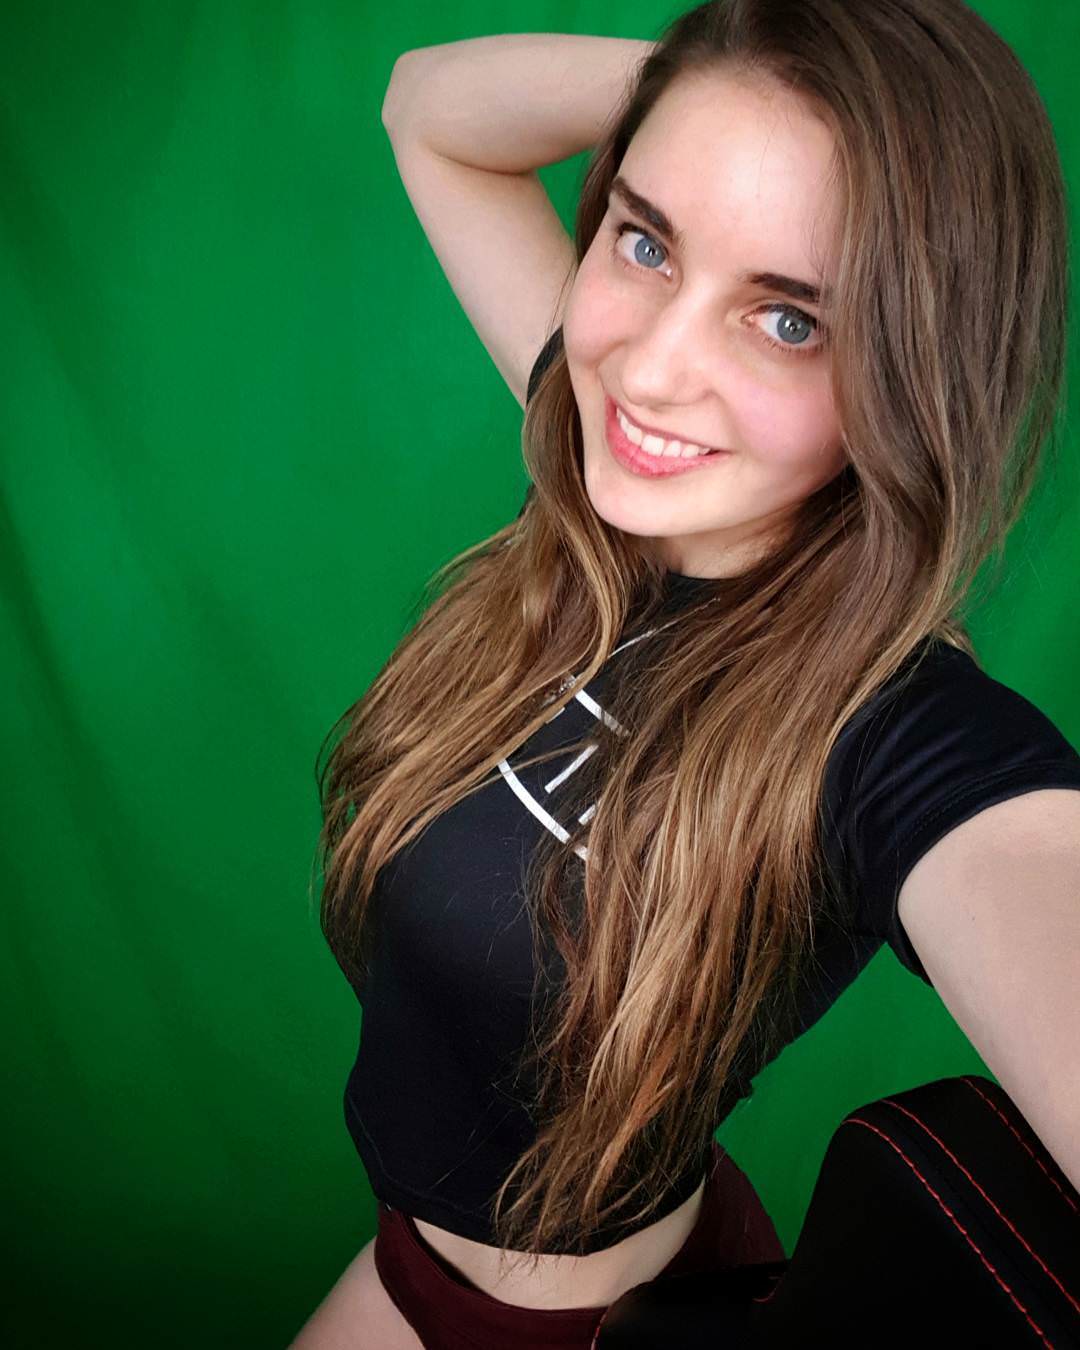 70+ Loserfruit Hot Pictures Are Too Much For You To Handle 48